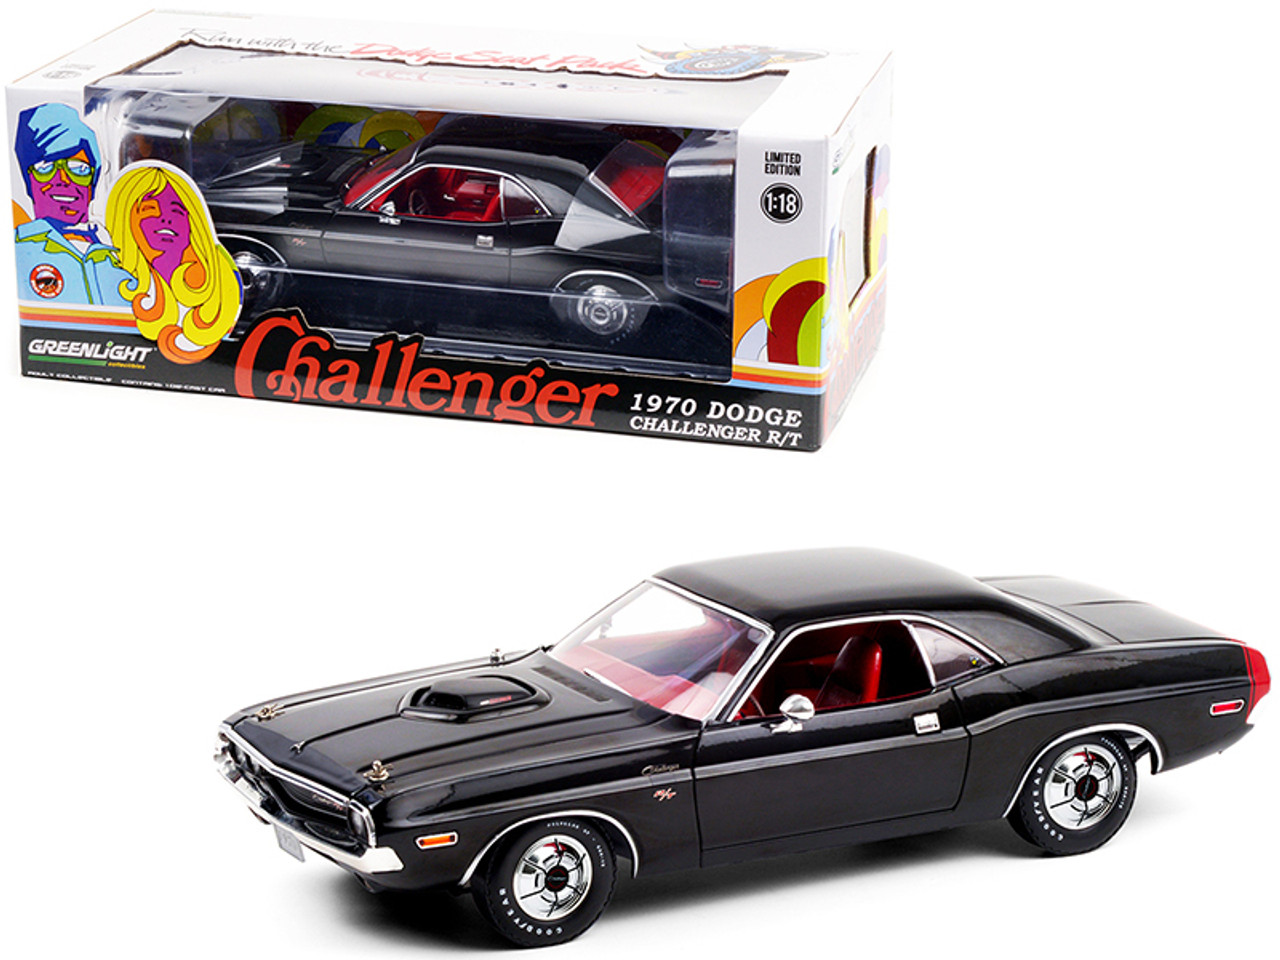 1970 Dodge Challenger R/T 440 Six Pack Black with Red Interior and Deluxe Wheel Covers 1/18 Diecast Model Car by Greenlight